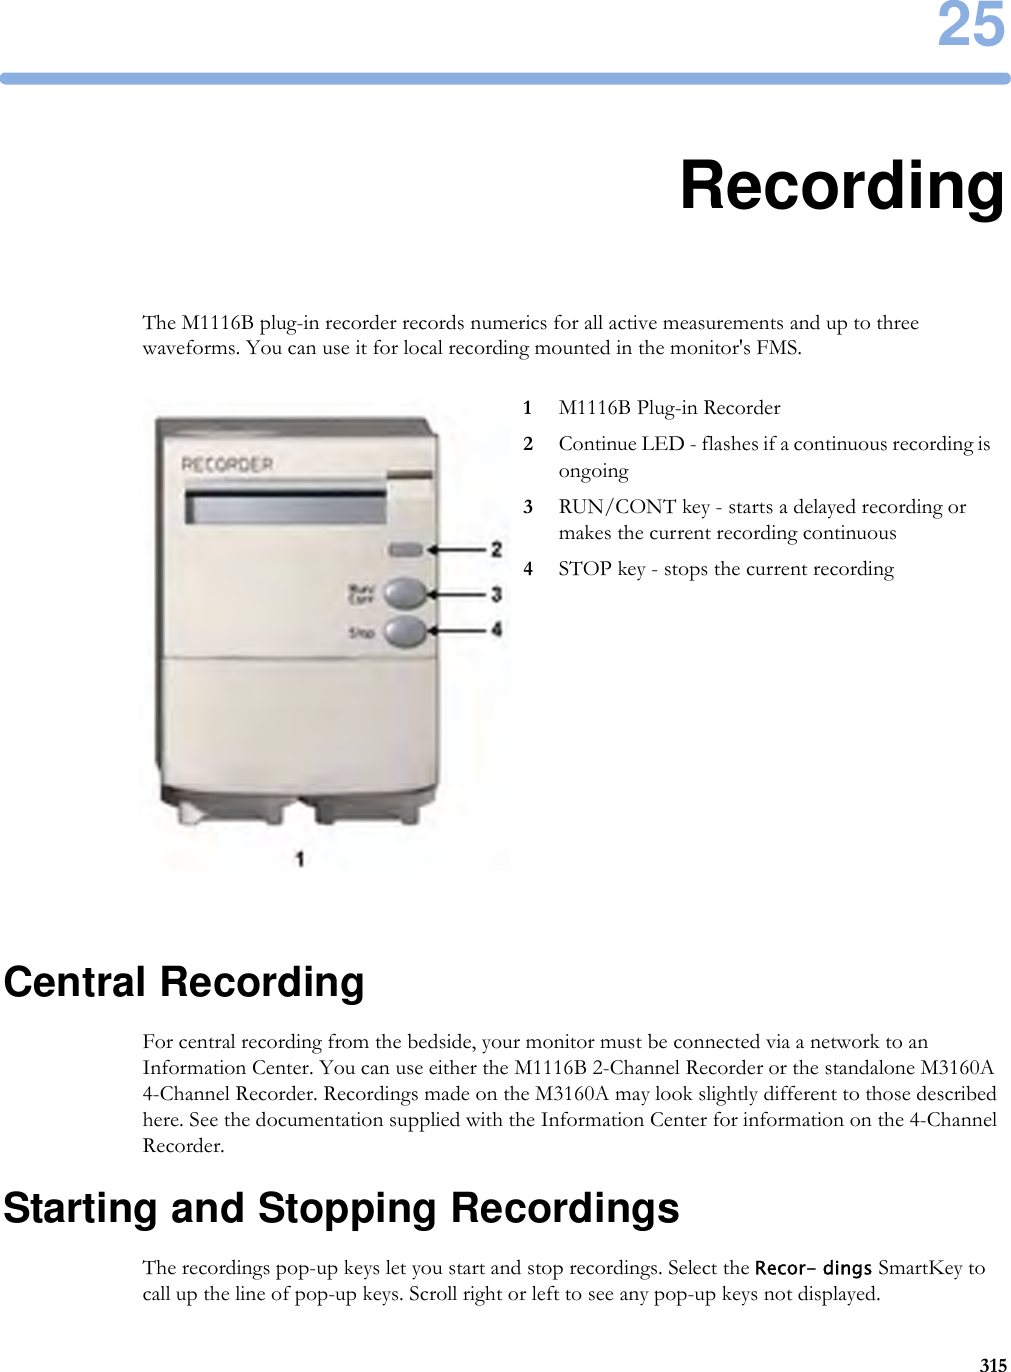 2531525RecordingThe M1116B plug-in recorder records numerics for all active measurements and up to three waveforms. You can use it for local recording mounted in the monitor&apos;s FMS.Central RecordingFor central recording from the bedside, your monitor must be connected via a network to an Information Center. You can use either the M1116B 2-Channel Recorder or the standalone M3160A 4-Channel Recorder. Recordings made on the M3160A may look slightly different to those described here. See the documentation supplied with the Information Center for information on the 4-Channel Recorder.Starting and Stopping RecordingsThe recordings pop-up keys let you start and stop recordings. Select the Recor- dings SmartKey to call up the line of pop-up keys. Scroll right or left to see any pop-up keys not displayed.1M1116B Plug-in Recorder2Continue LED - flashes if a continuous recording is ongoing3RUN/CONT key - starts a delayed recording or makes the current recording continuous4STOP key - stops the current recording